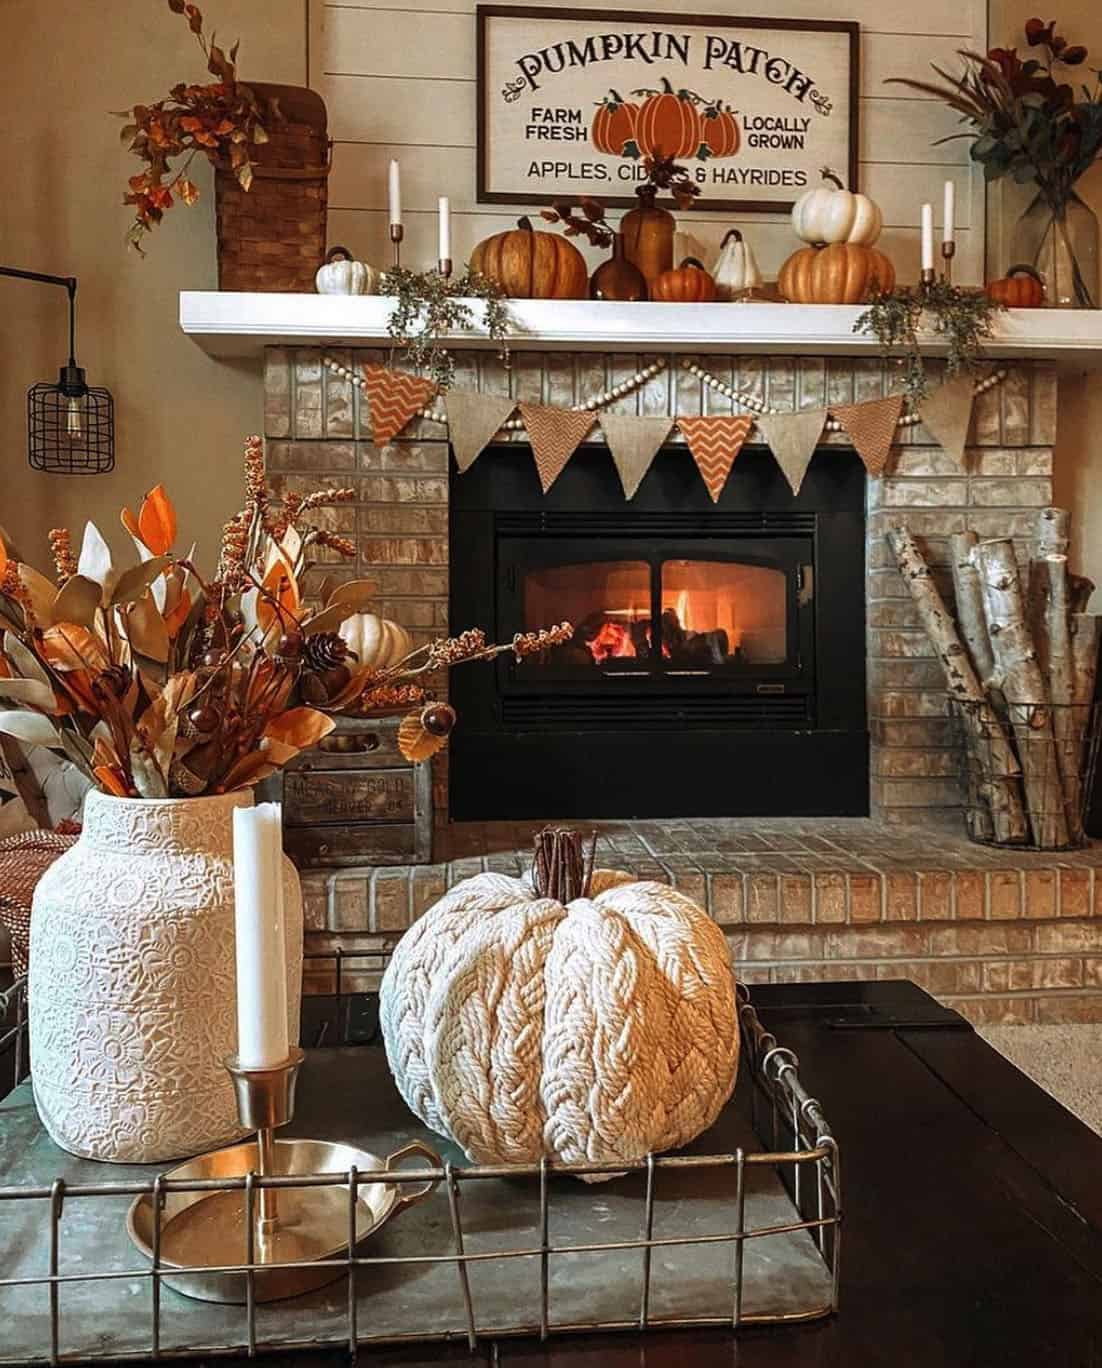 Autumn Allure: Creating a Welcoming Home for the Season